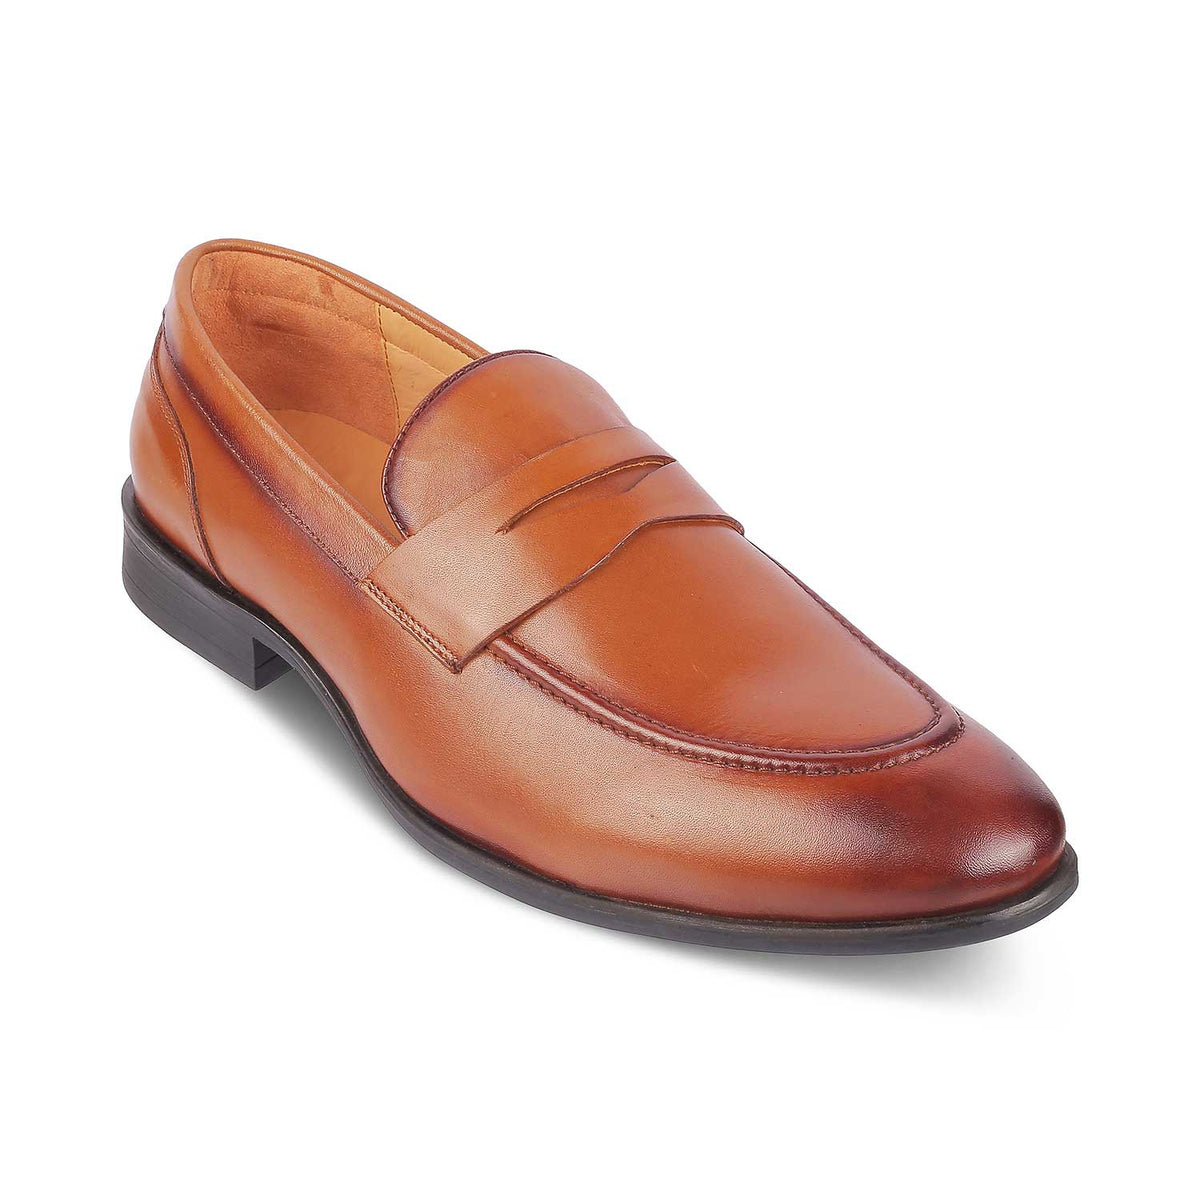 Tresmode Dawson Tan Men's Leather Penny Loafers - Tresmode